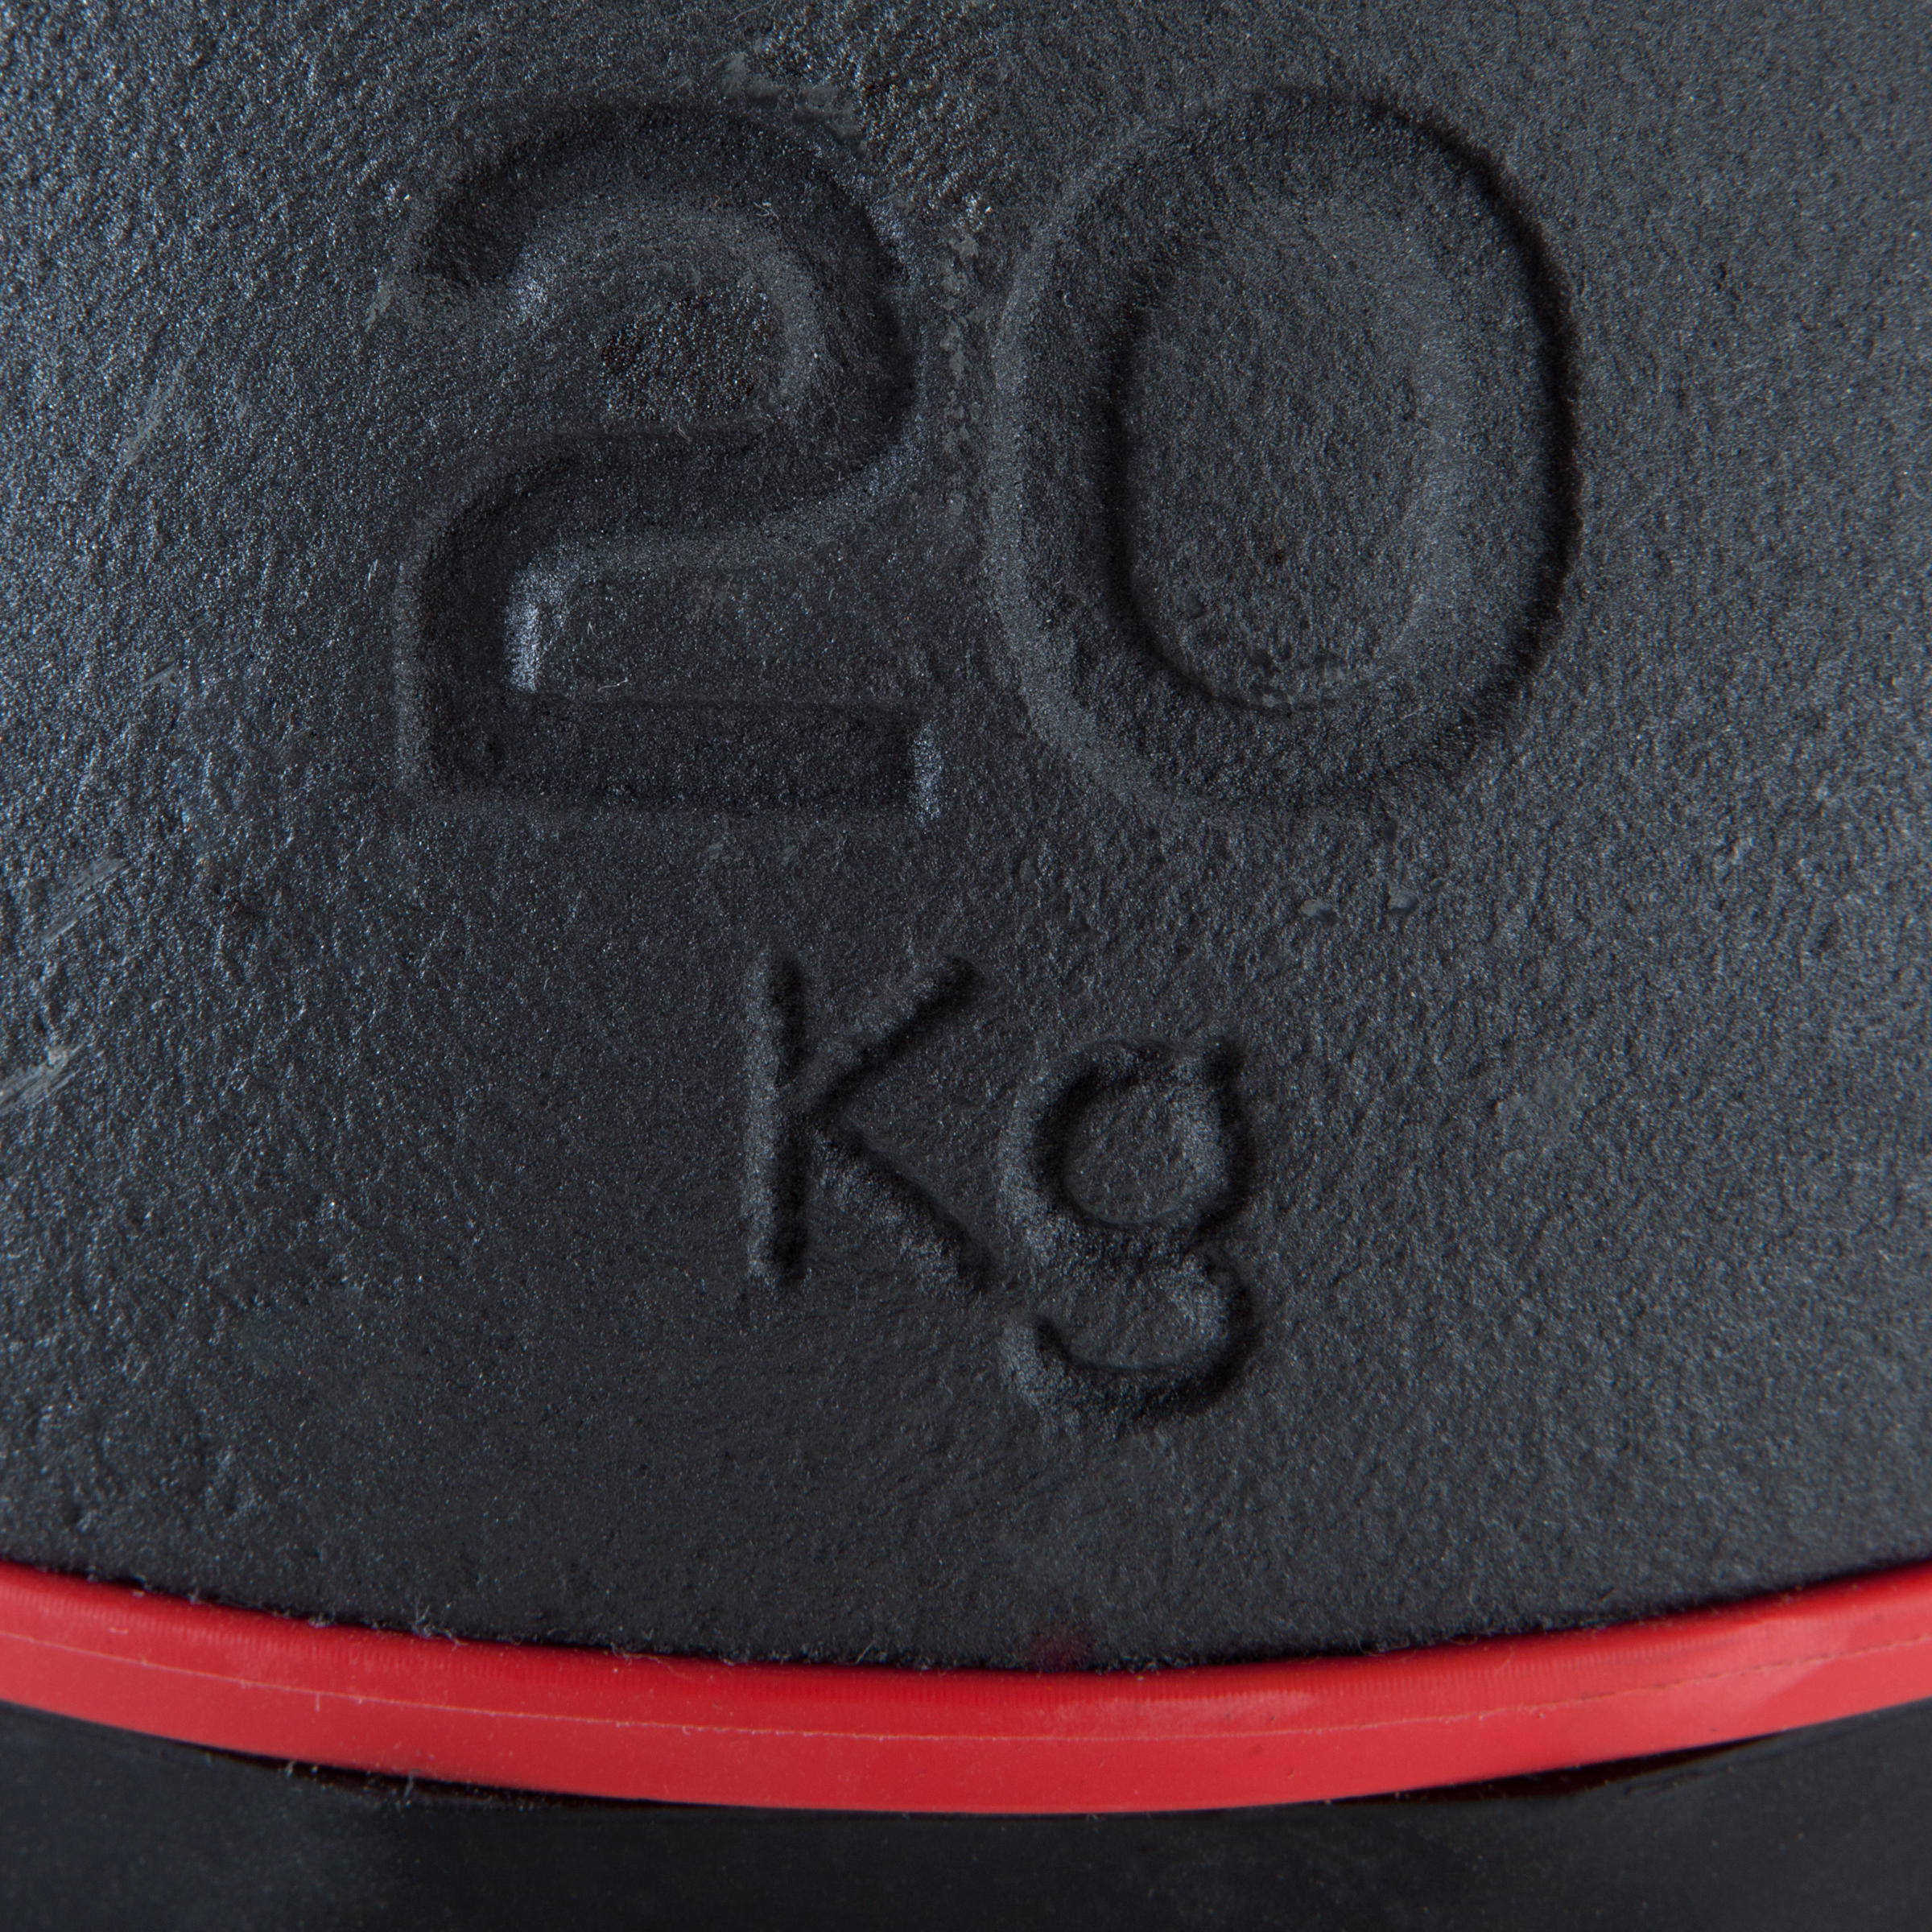 Cast Iron Kettlebell with Rubber Base - 20 kg 4/5